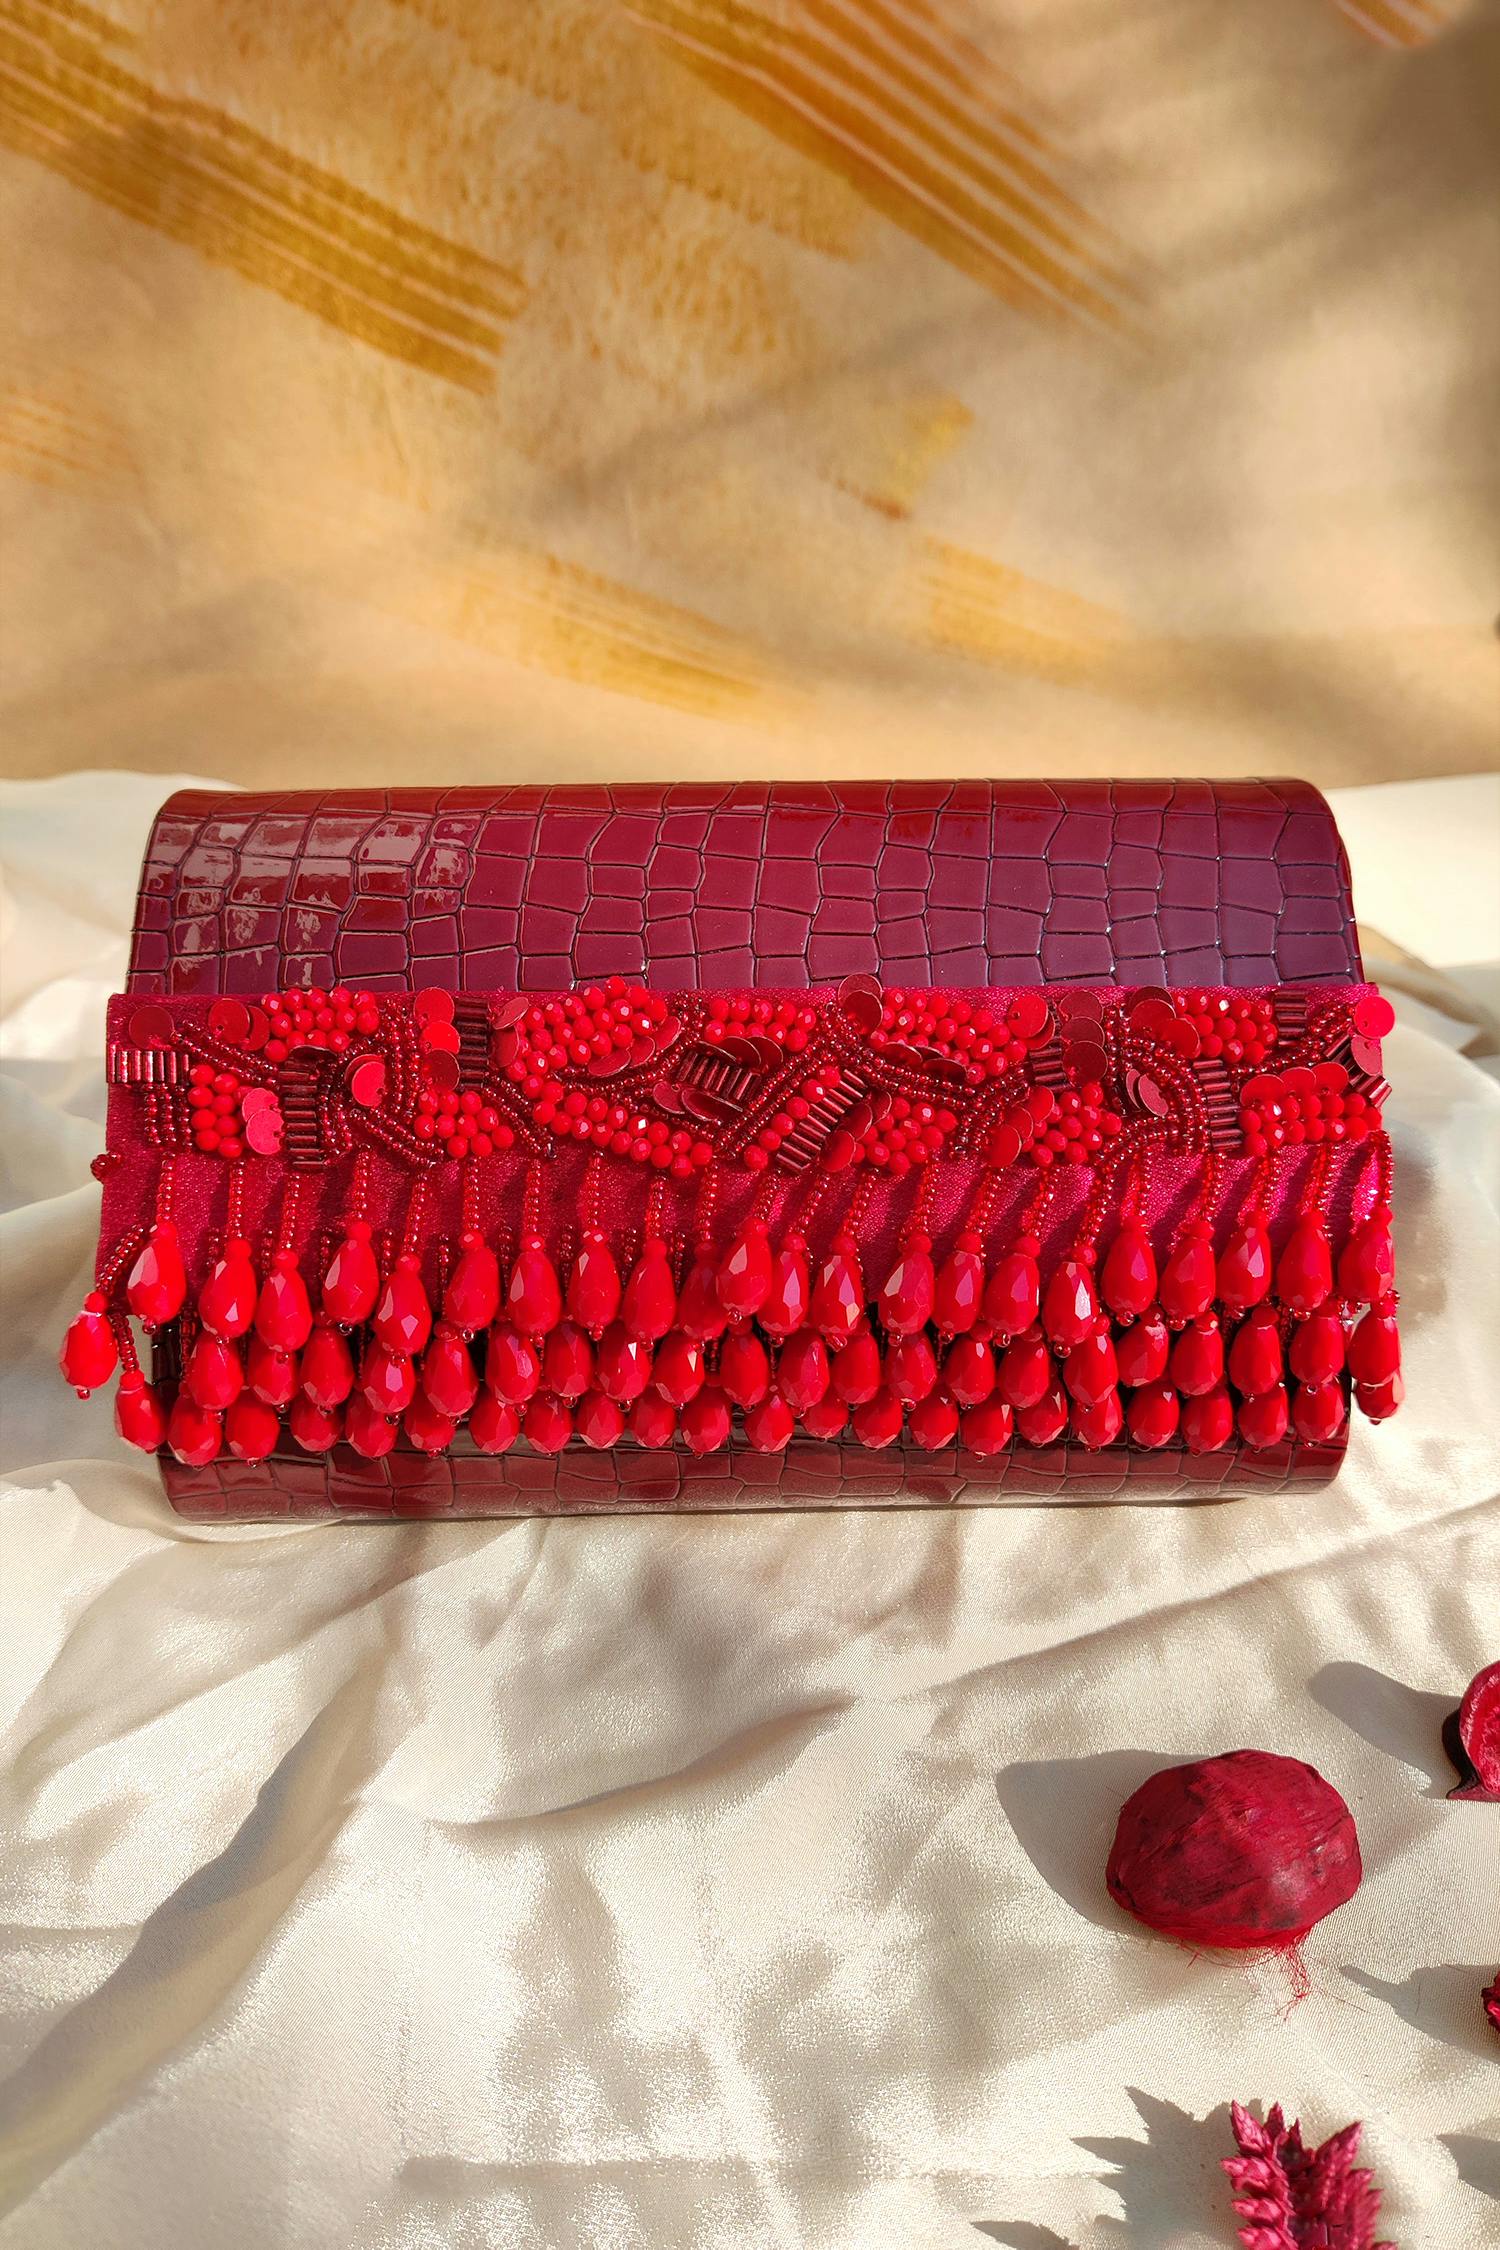 NOORIE Red Clutch, a product by Clutcheeet